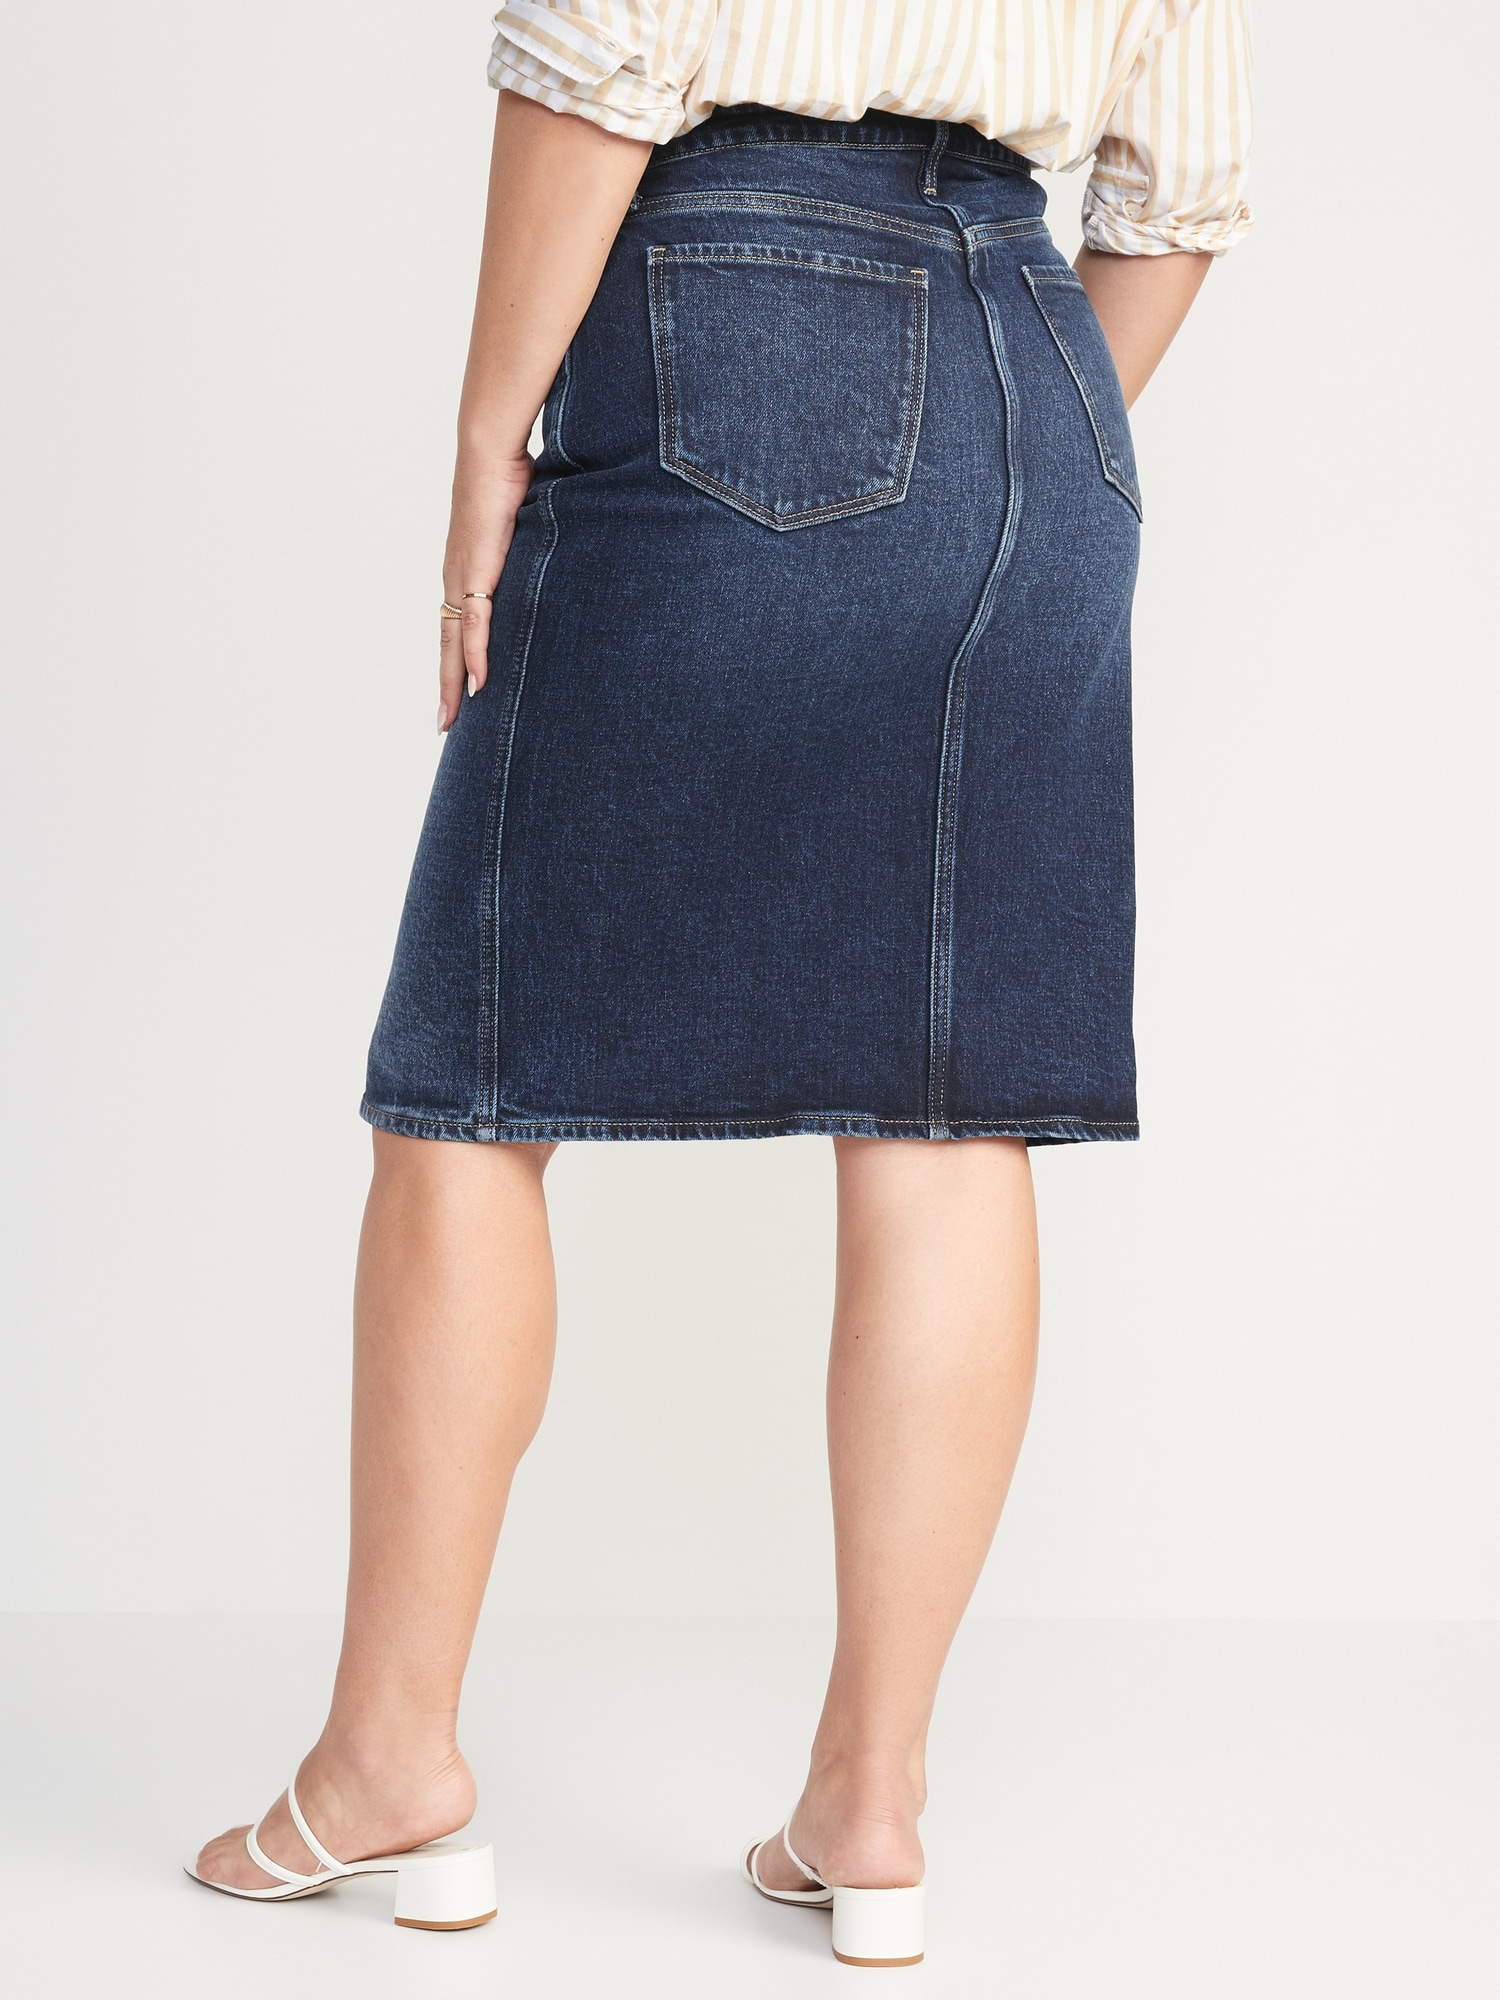 Higher High-Waisted Button-Fly Midi Jean Pencil Skirt for Women